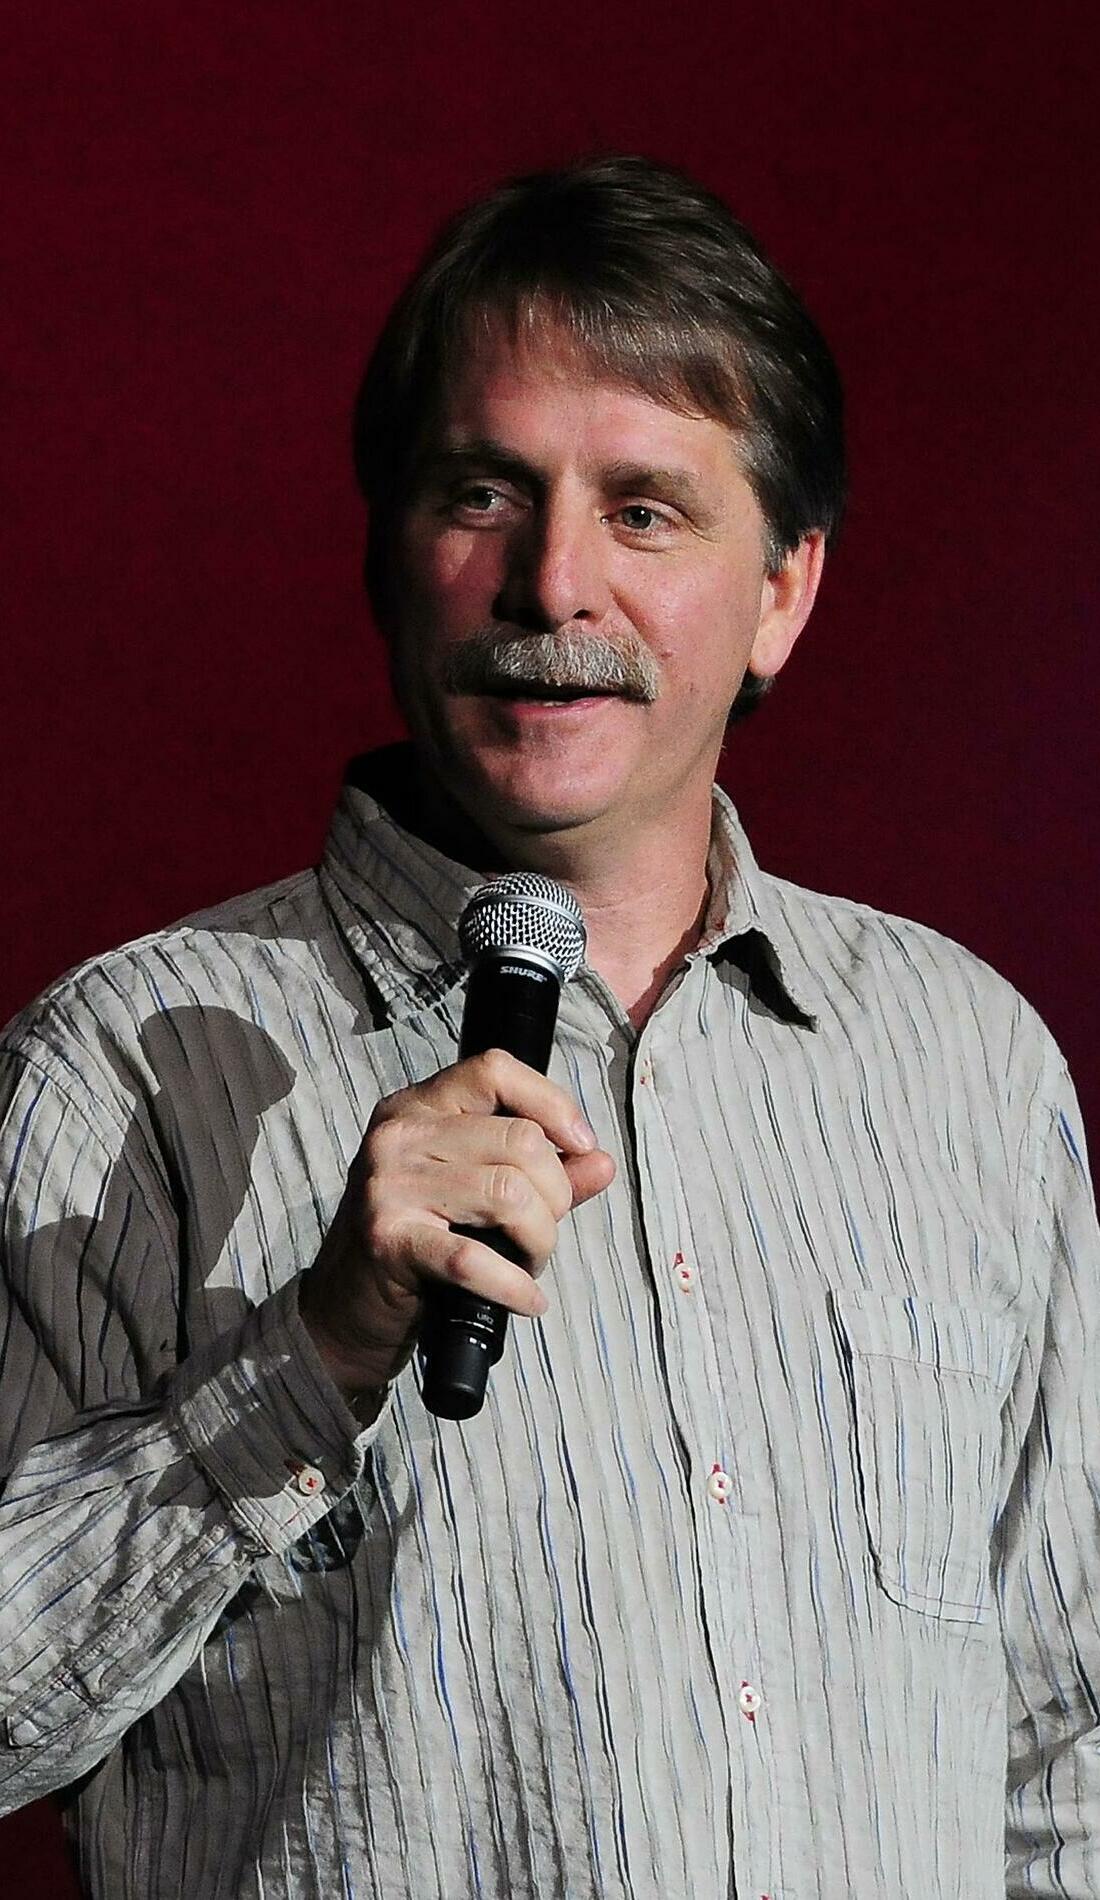 A Jeff Foxworthy live event